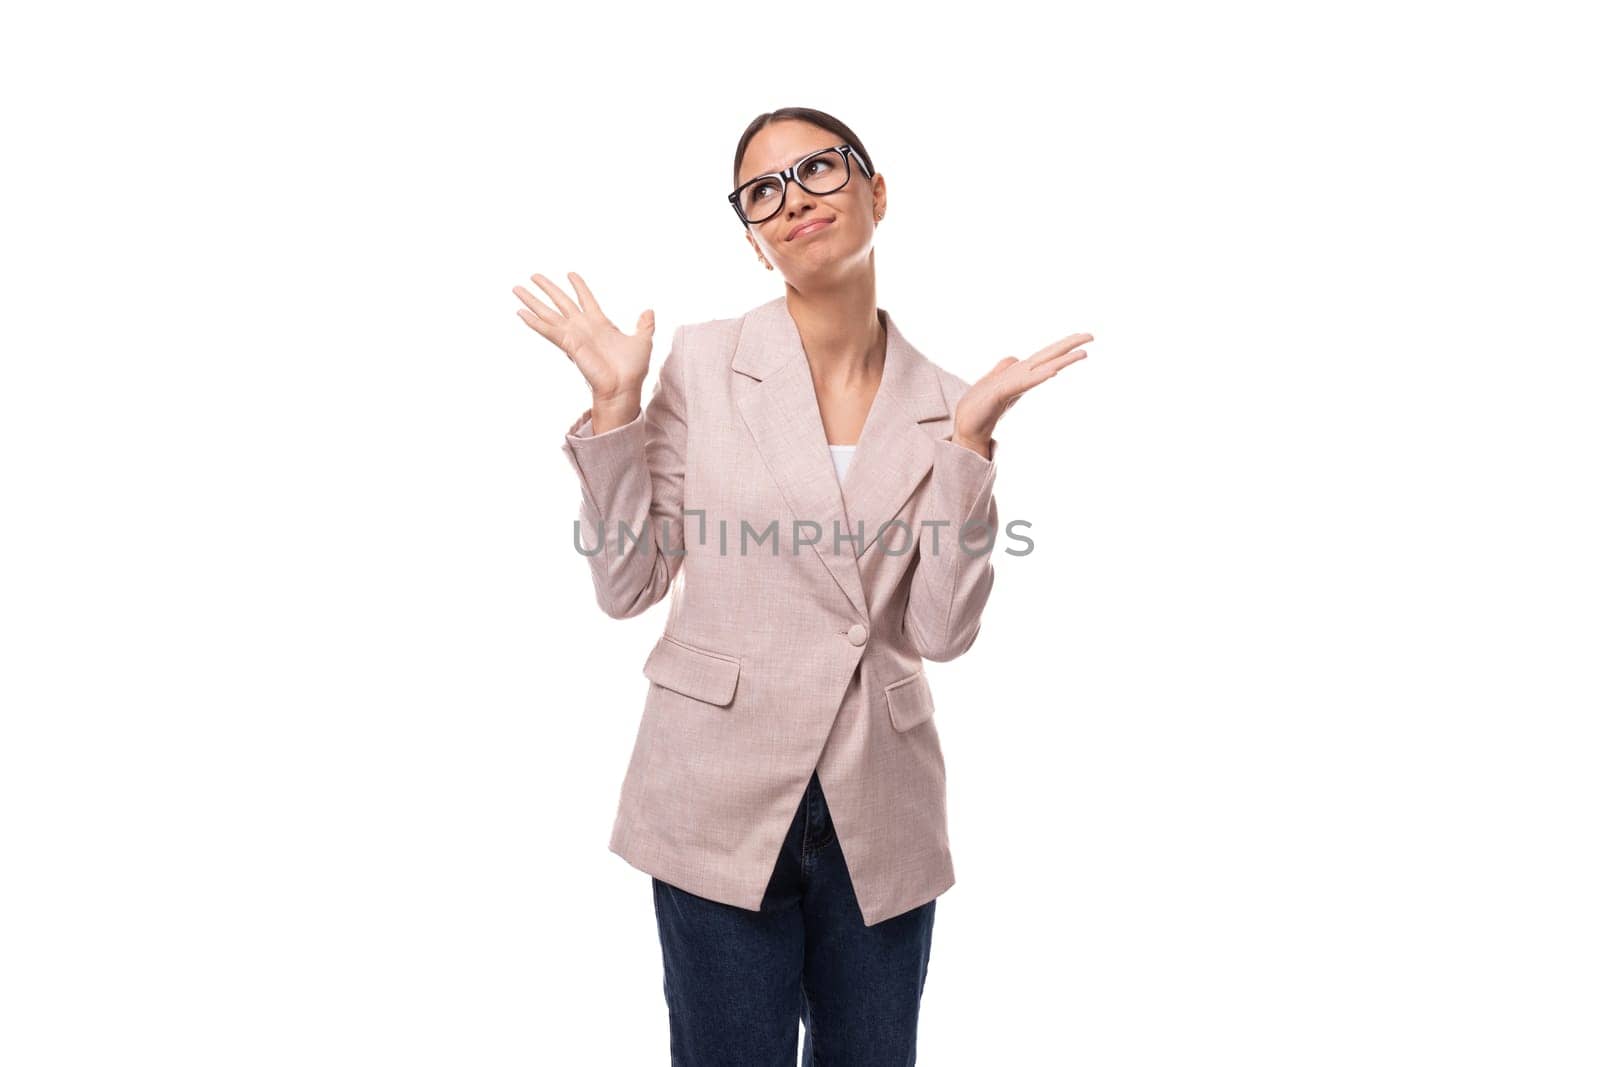 successful pretty 30 year old business woman with black hair wearing a beige jacket on a white background with copy space.